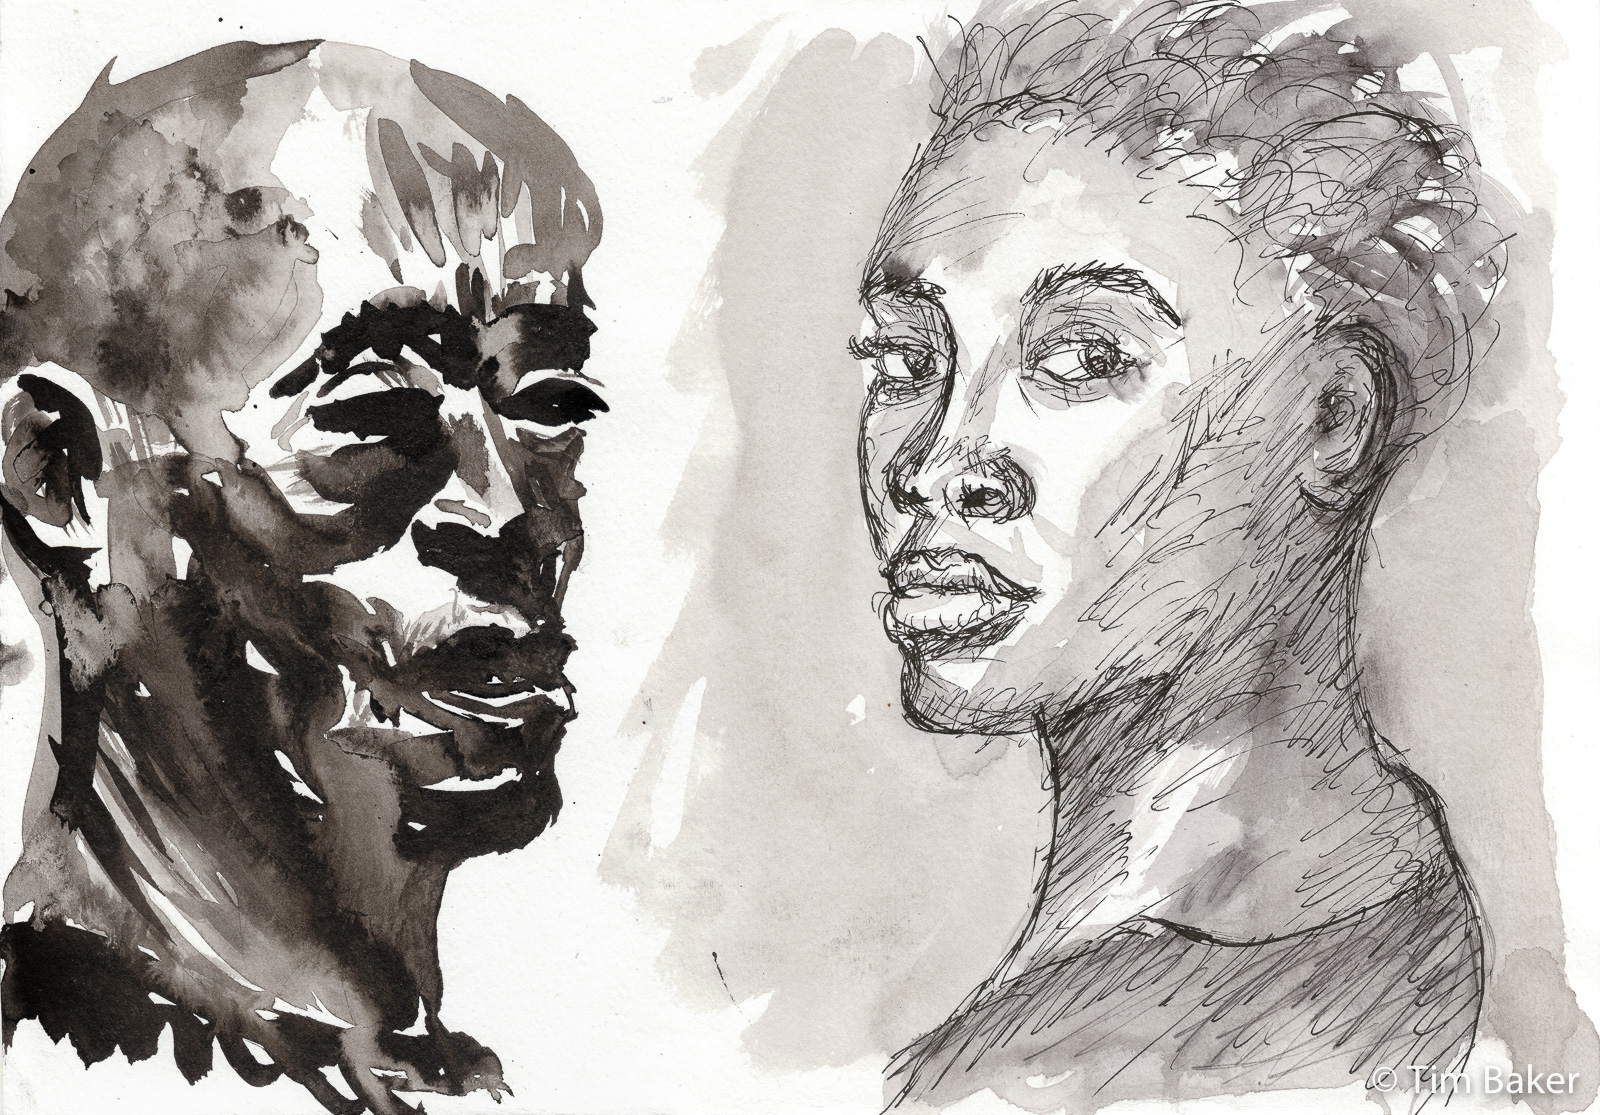 Him & Her Diptych, Online Portraits 4, Himalaya V2 pen with Sketchink and W&N Indian Ink and brush, Fabriano Unica paper, 25.5x35cm